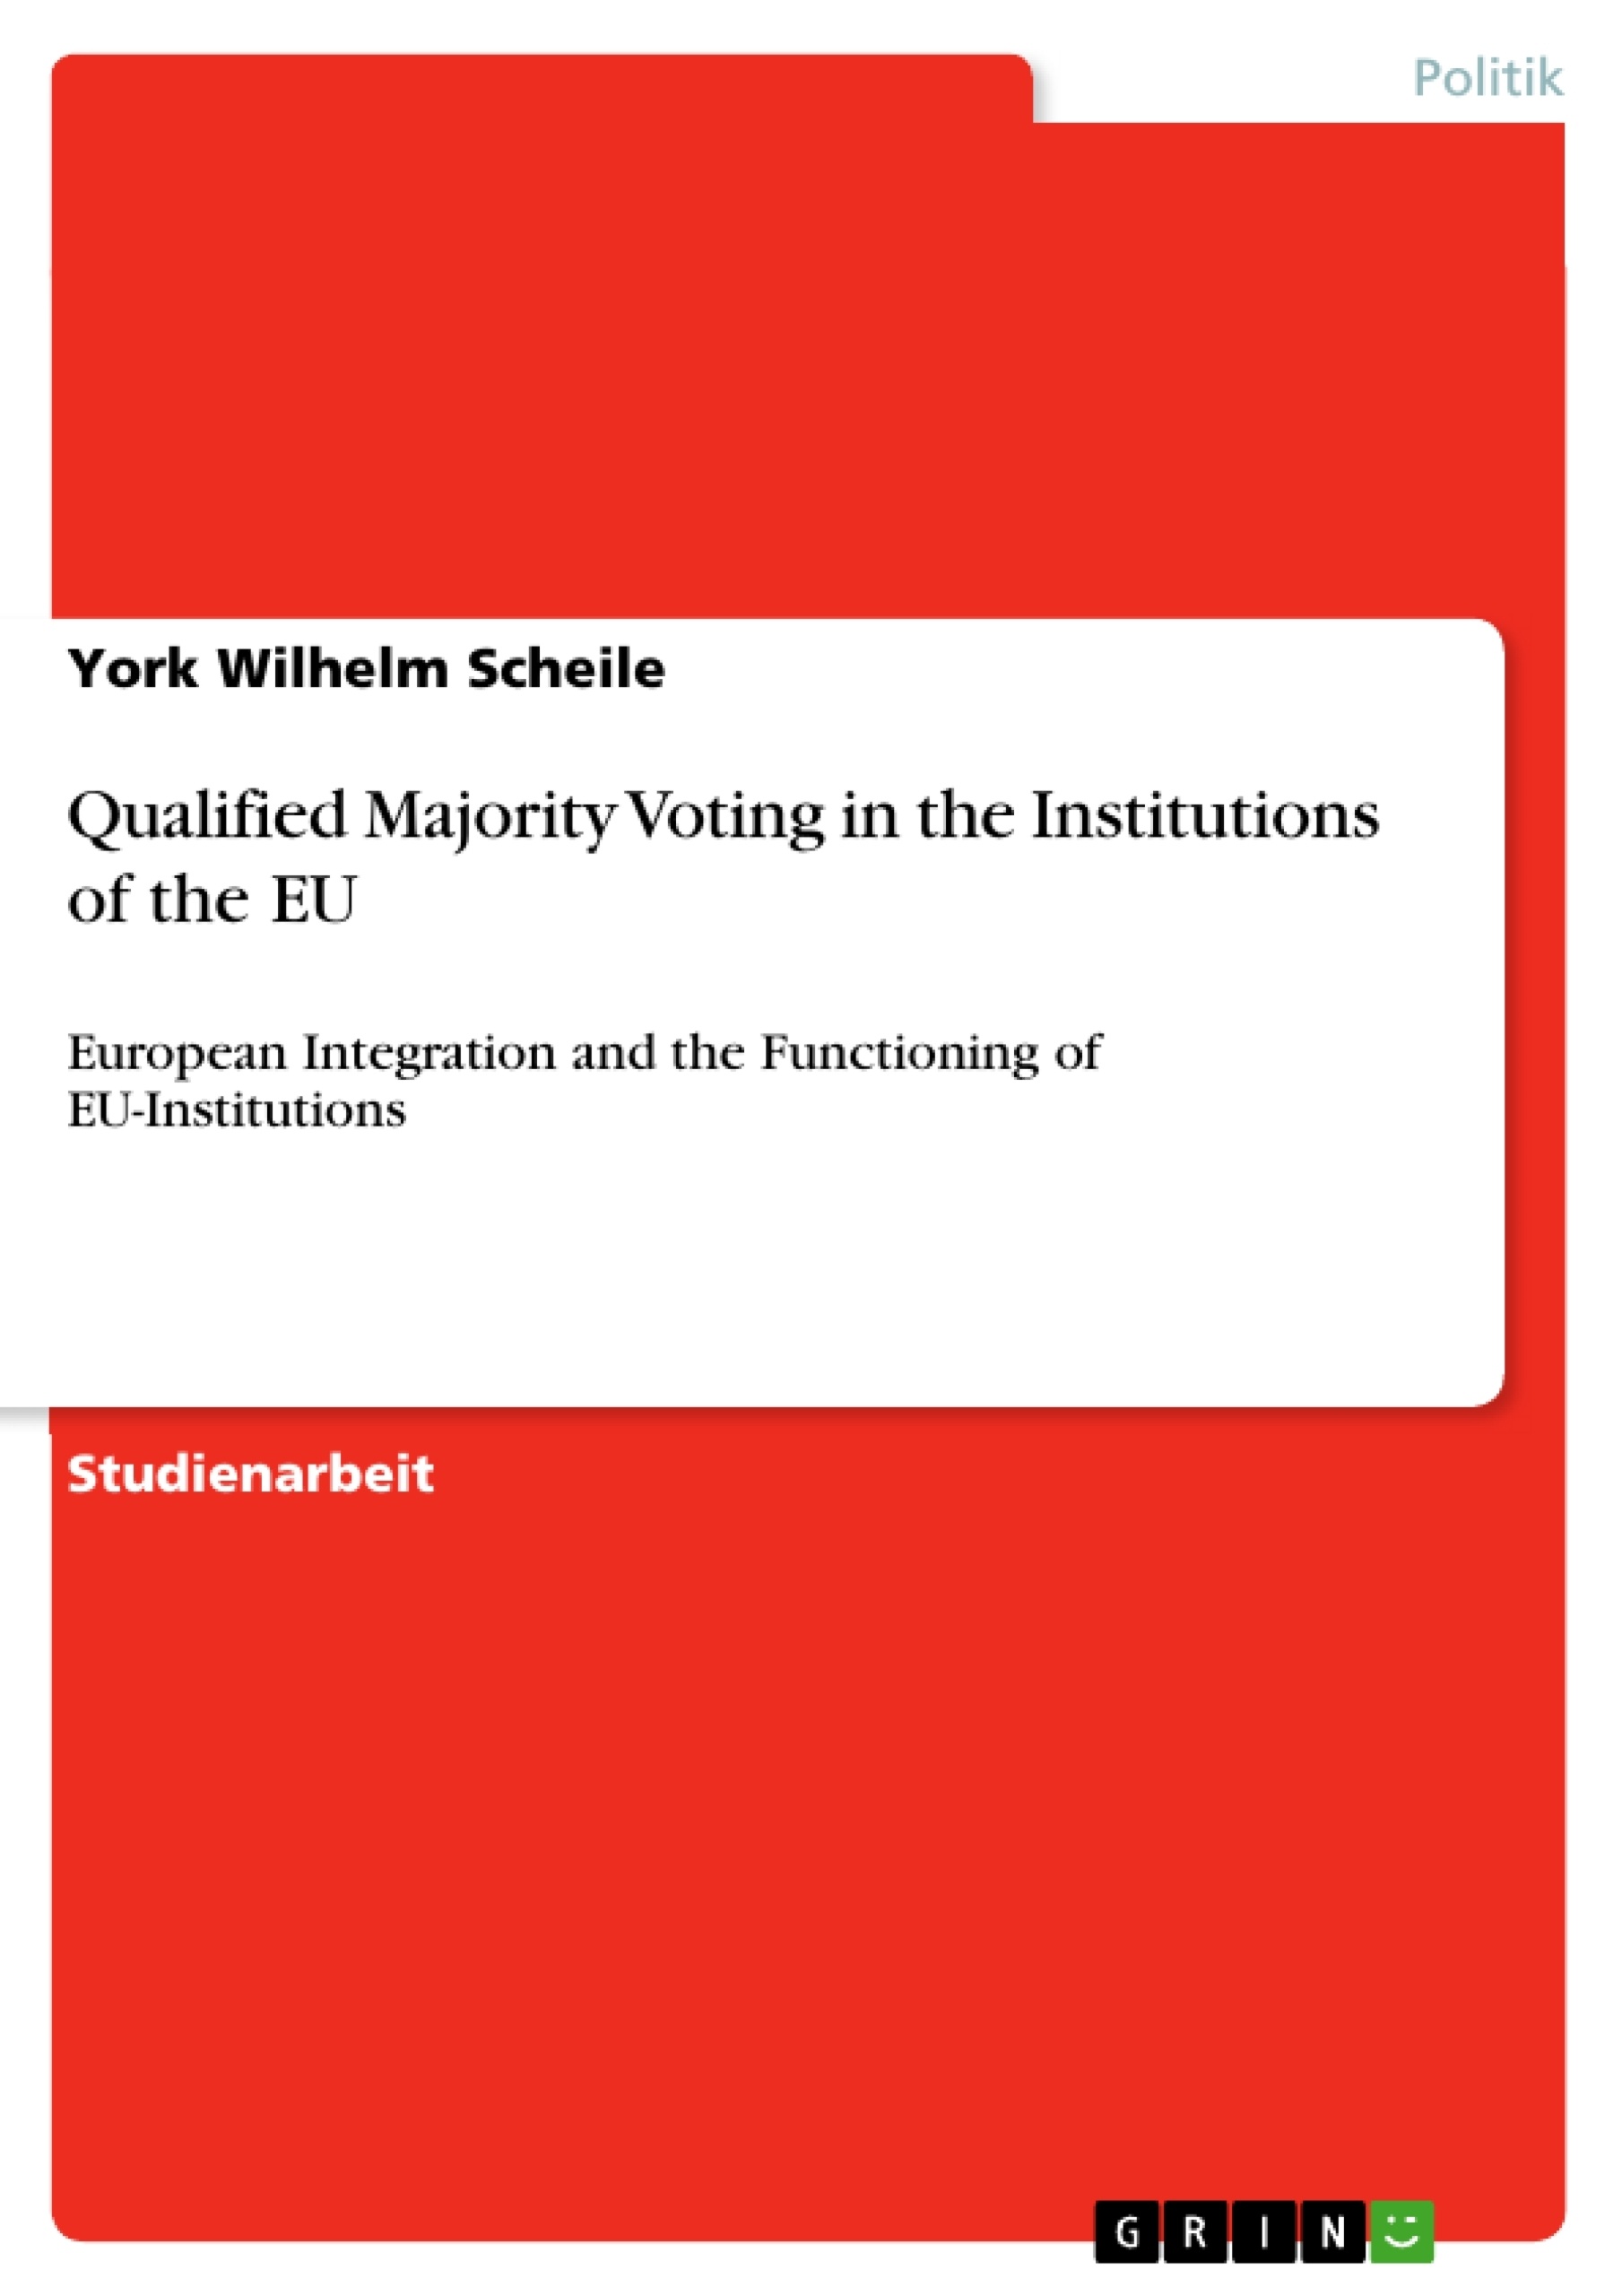 Title: Qualified Majority Voting in the Institutions of the EU